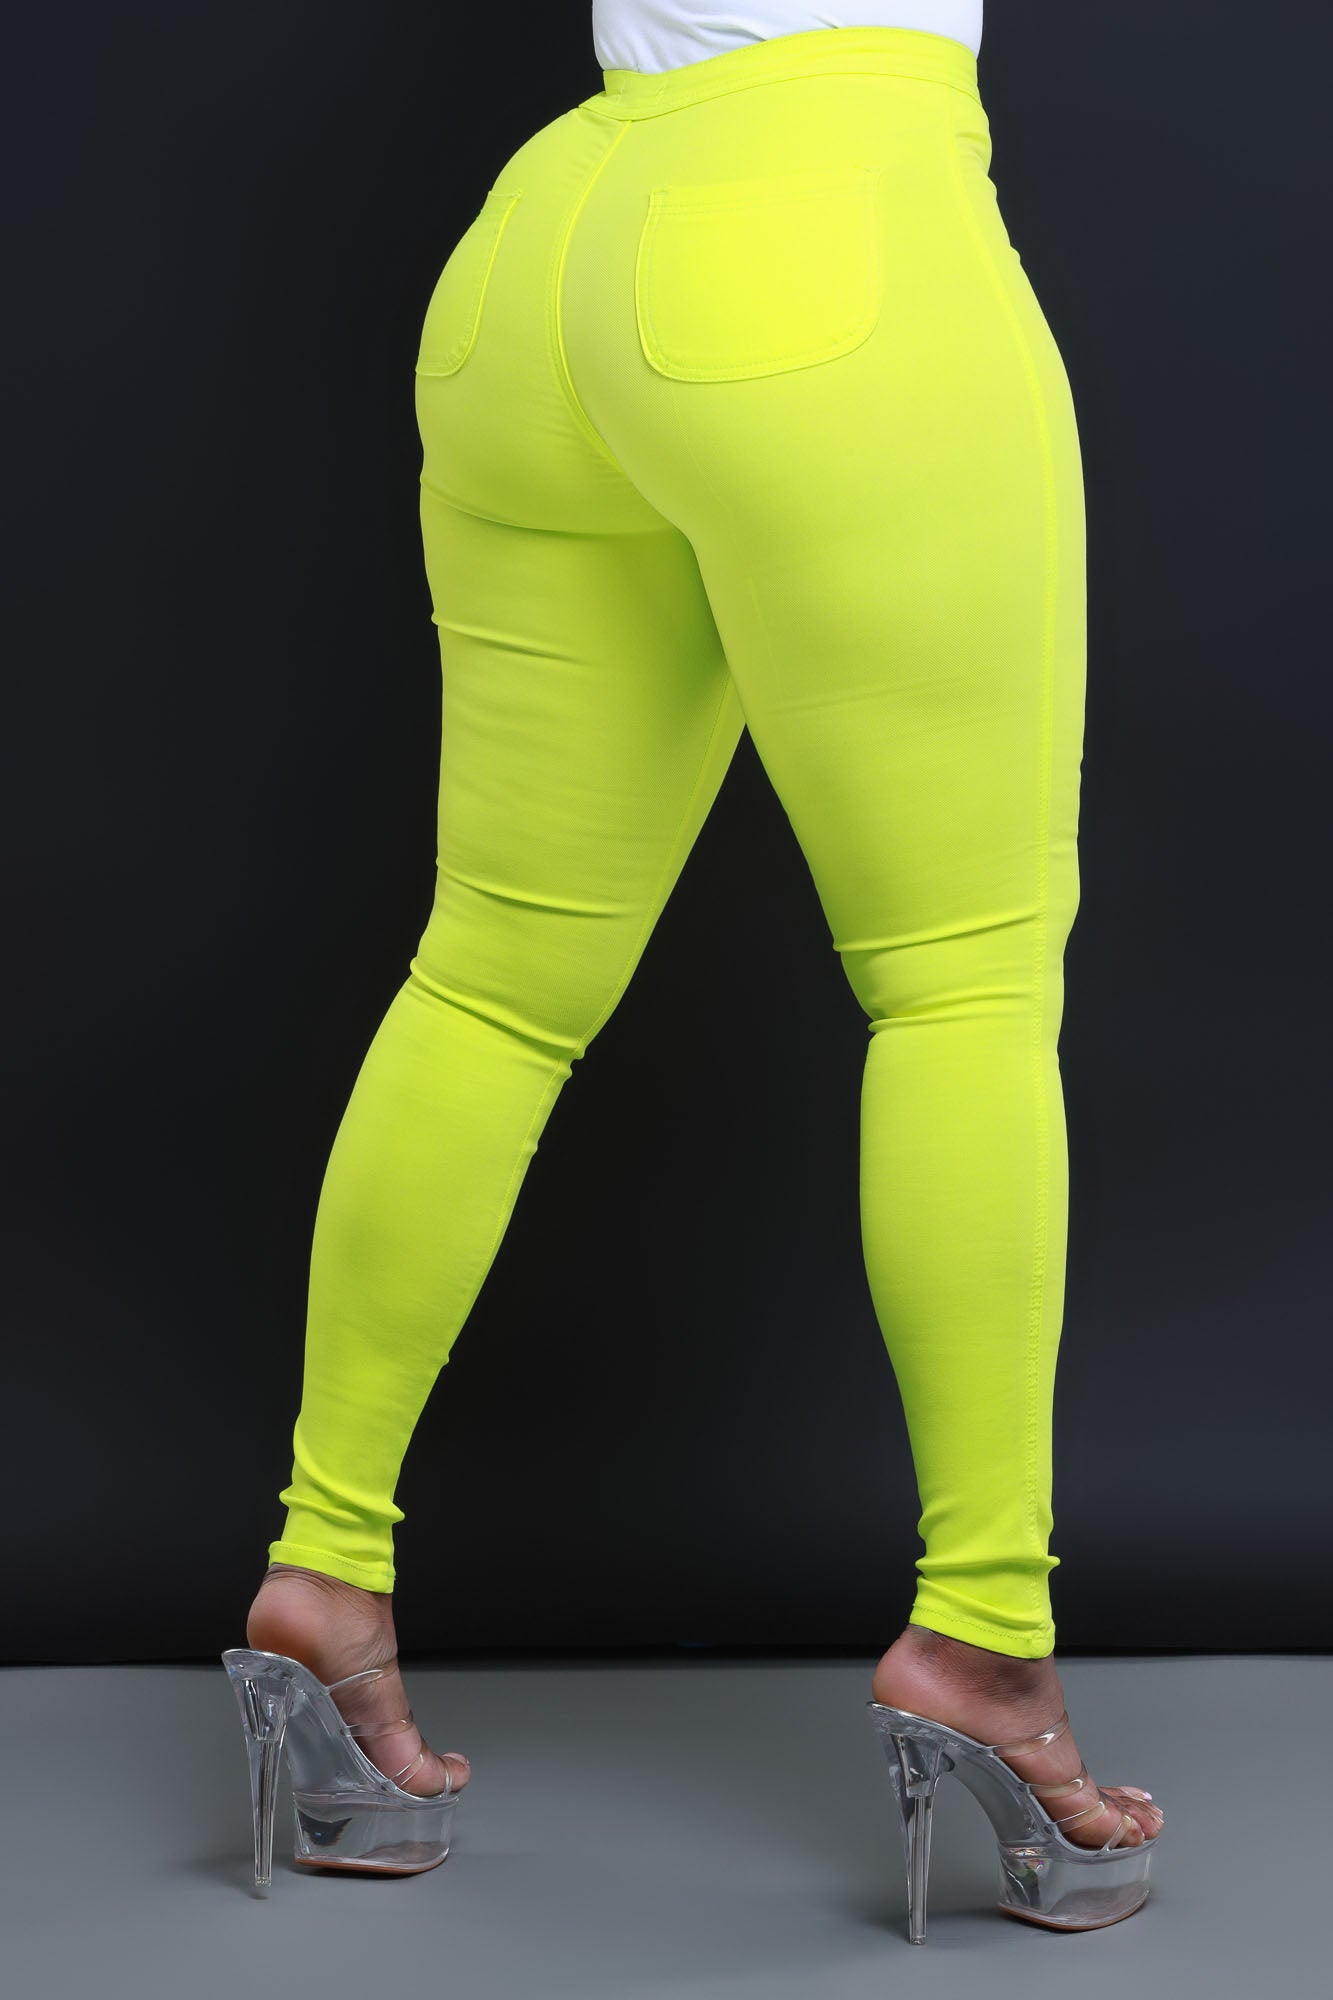 $15.99 Super Swank High Waist Stretchy Jeans - Neon Yellow